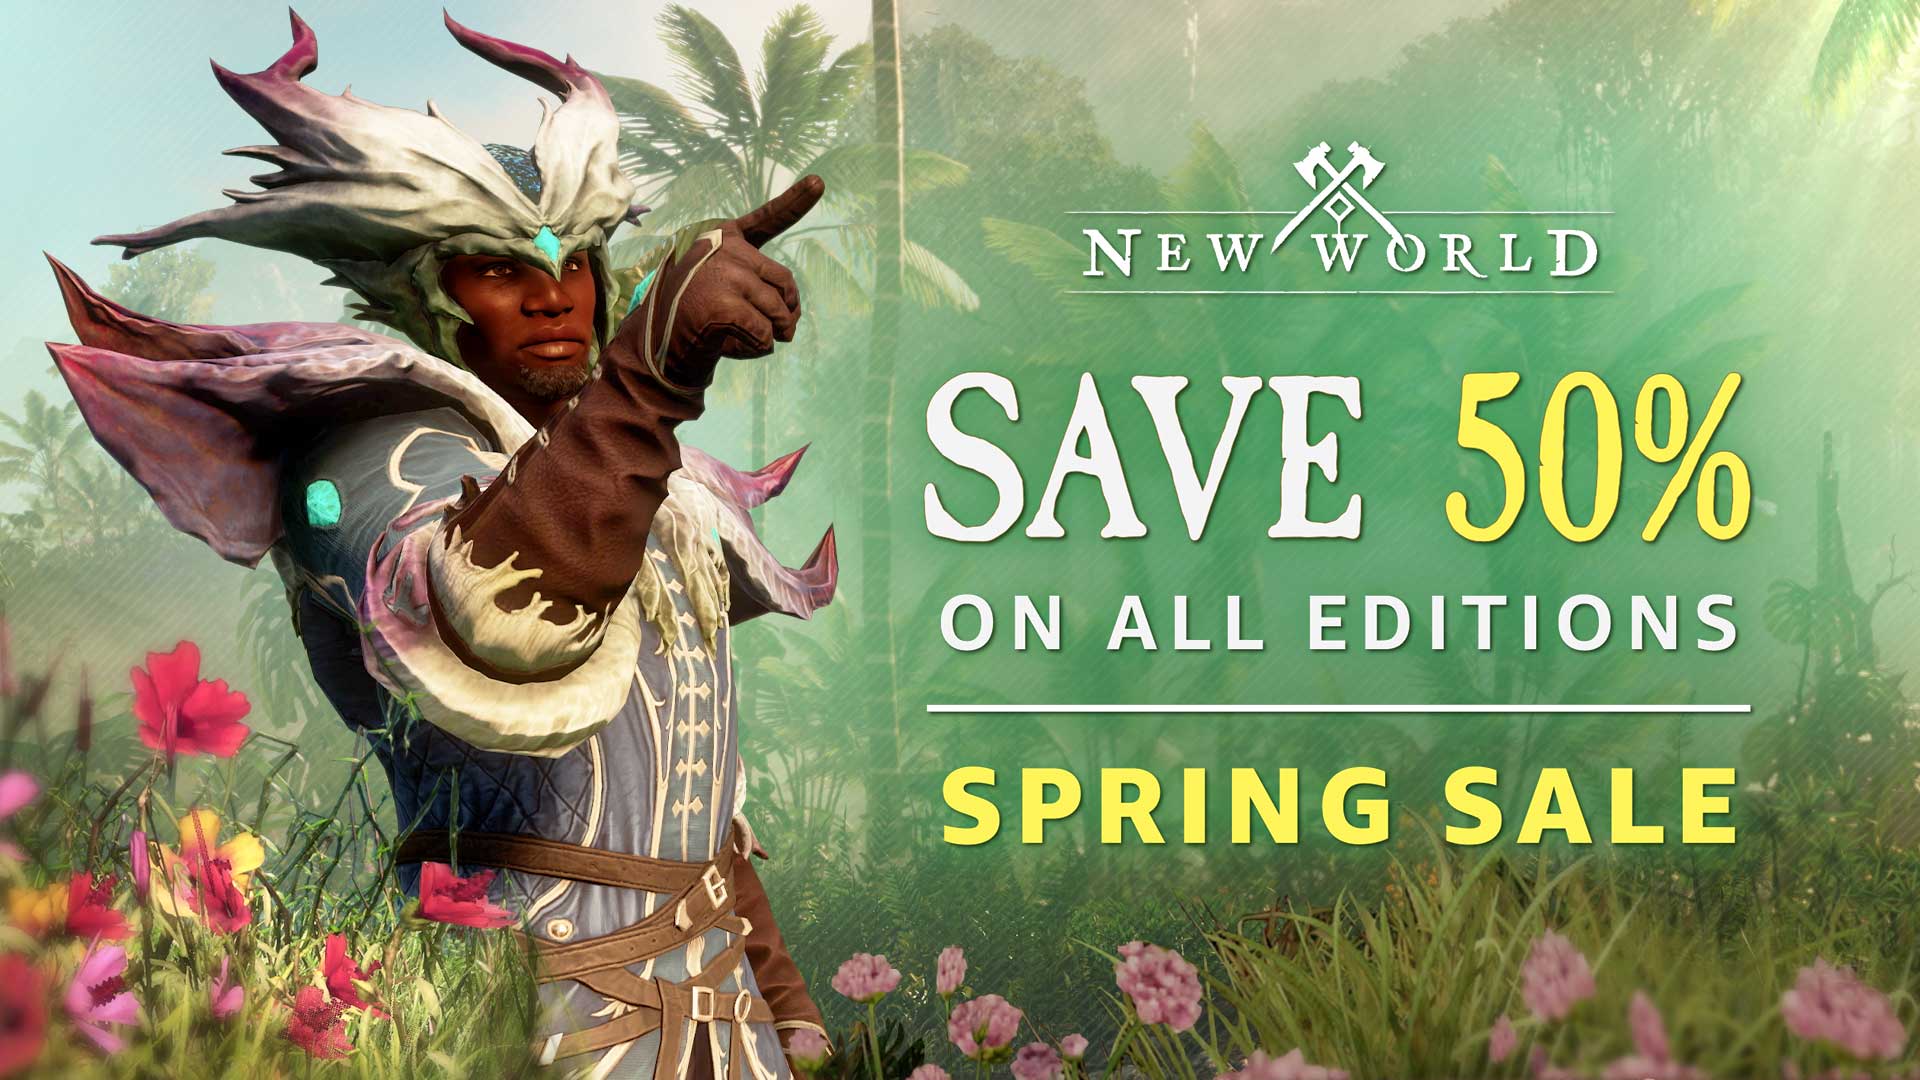 New World Spring Sale News New World Open World MMO PC Game